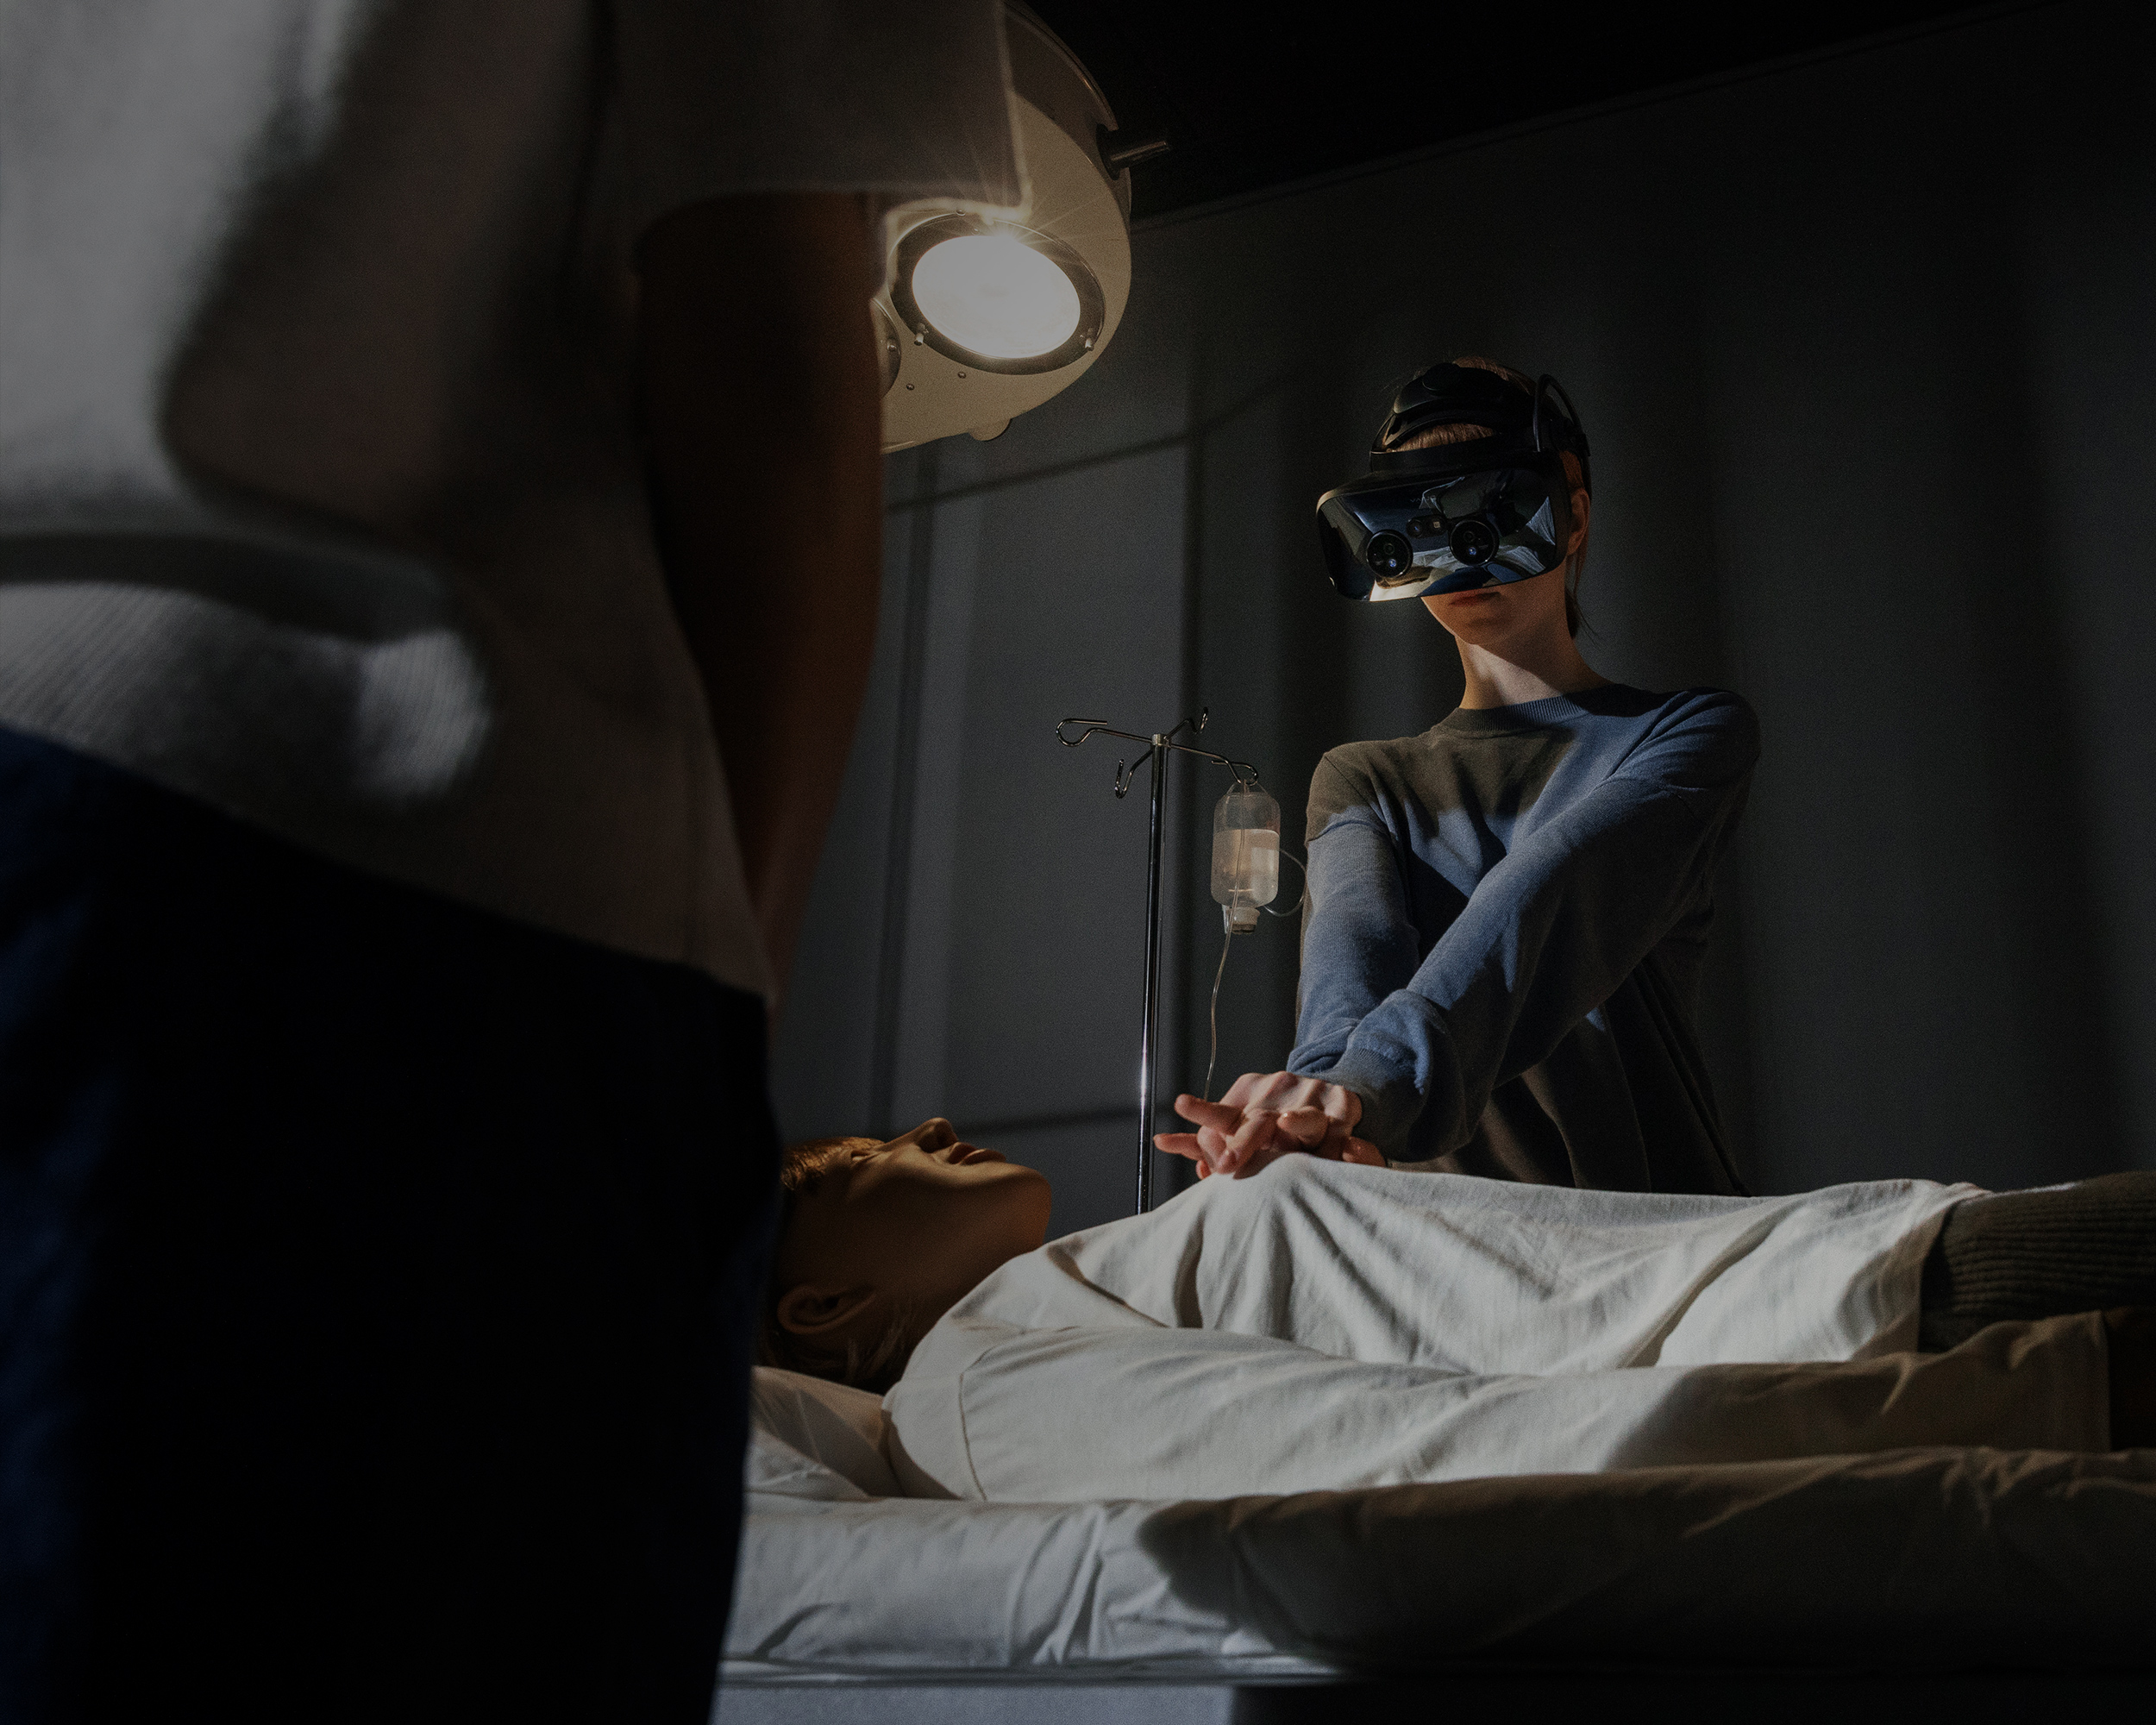 Virtual reality (VR), augmented reality and mixed reality for medical and healthcare use – Varjo